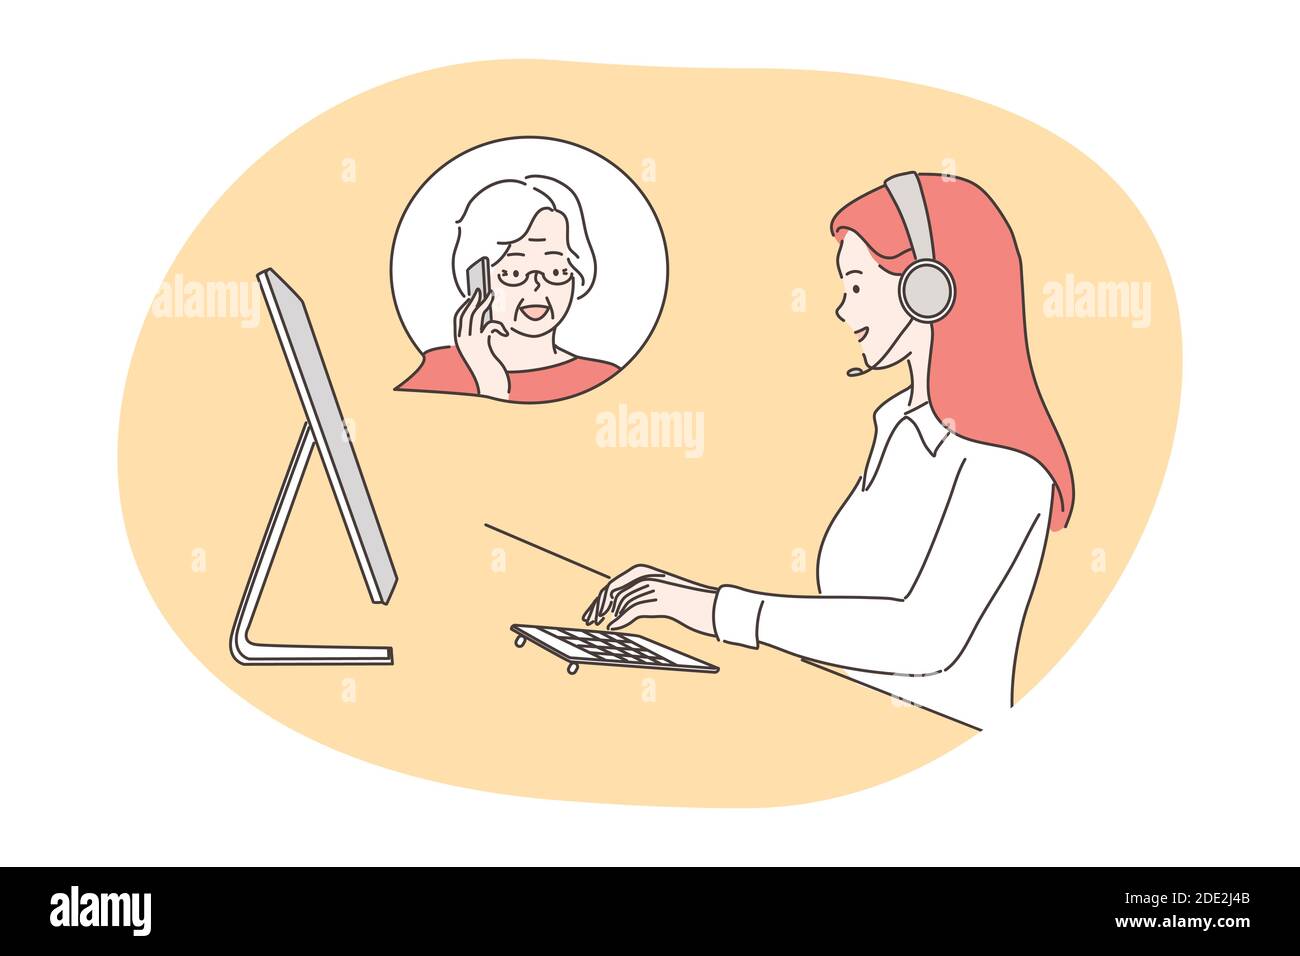 Service, call center concept. Woman operator consultant cartoon character with headset talking gives advise to senior citizen online. Wireless custome Stock Vector